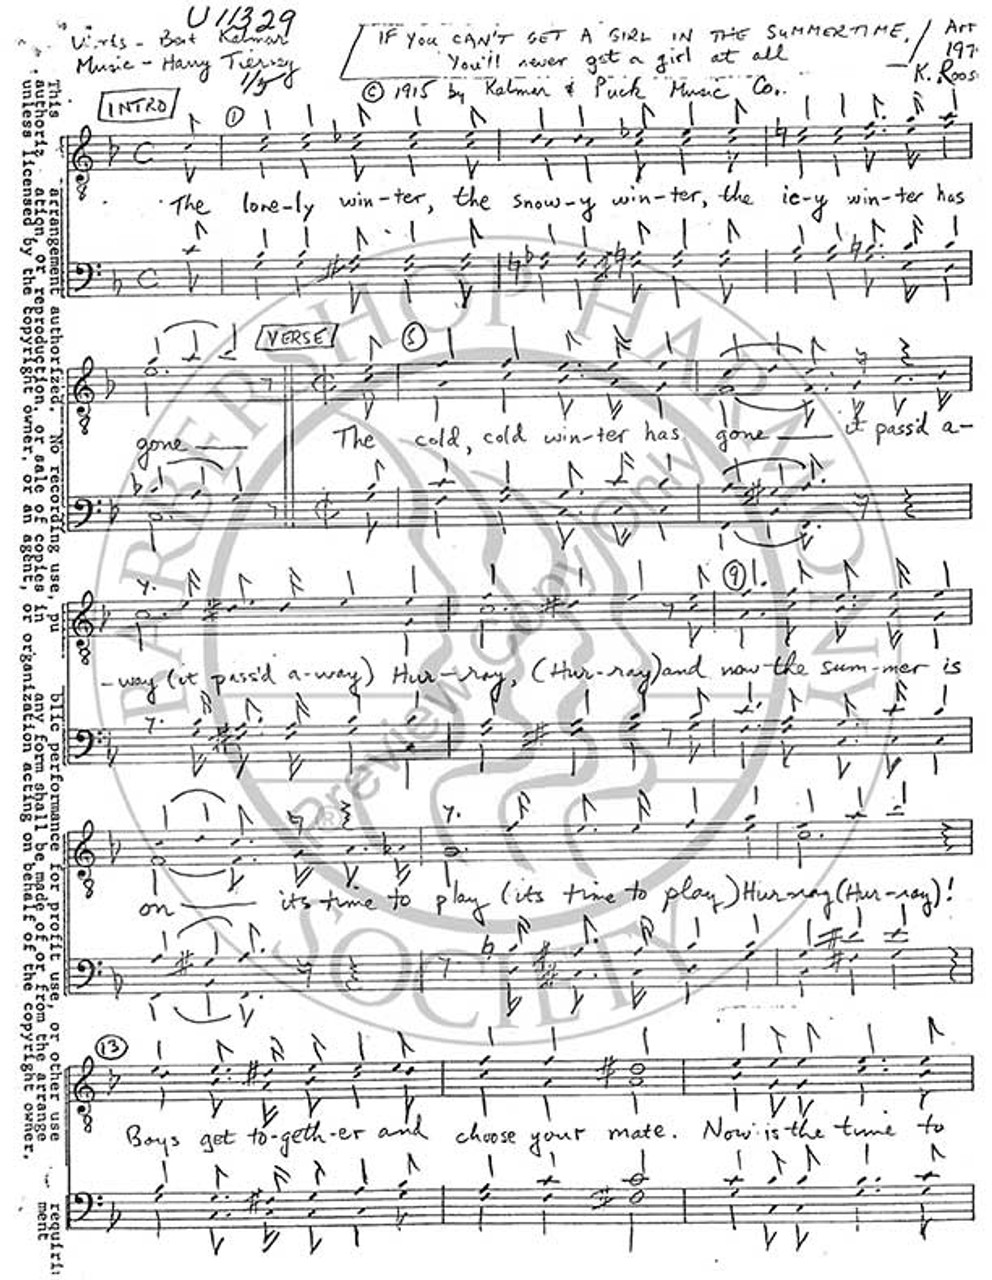 If You Can't Get A Girl In The Summertime (TTBB) (arr. Kirk Roose)-UNPUB